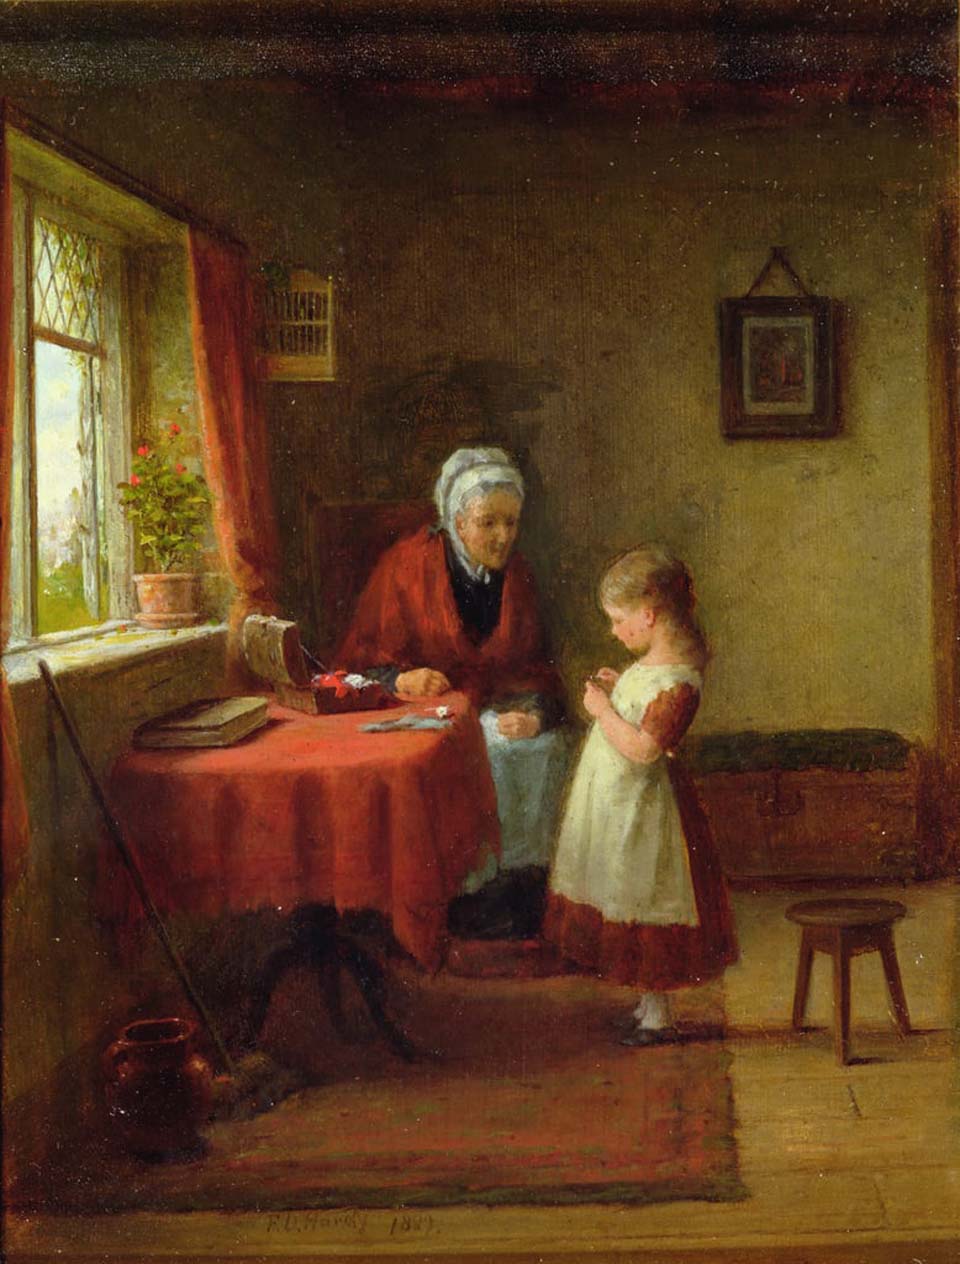 The first sewing lesson